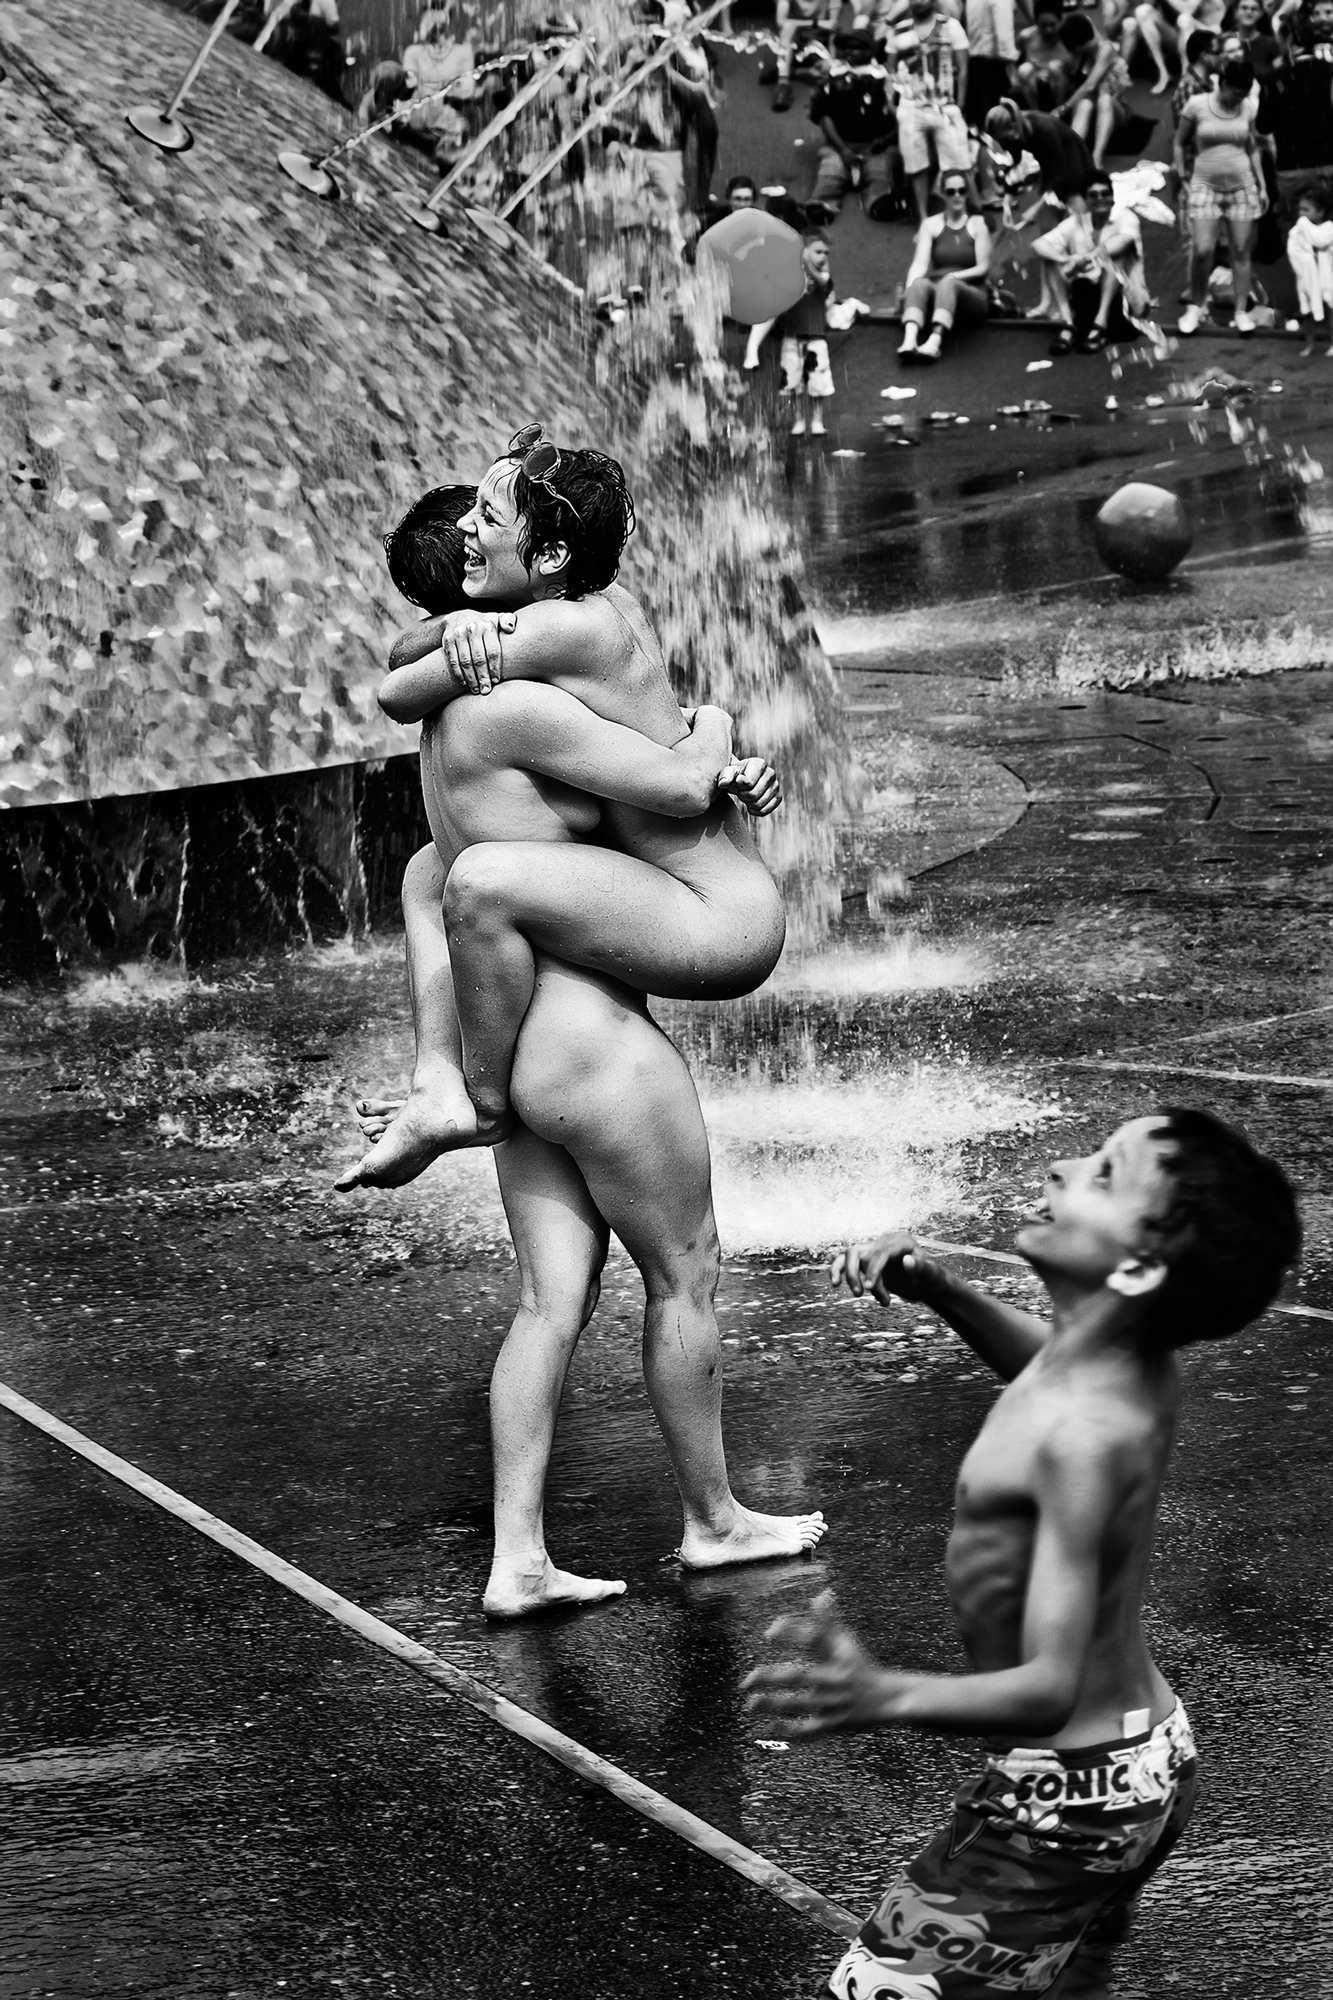 Two women embrace while a boy plays ball at the International Fountain at Seattle PrideFest on June 26th, 2011.